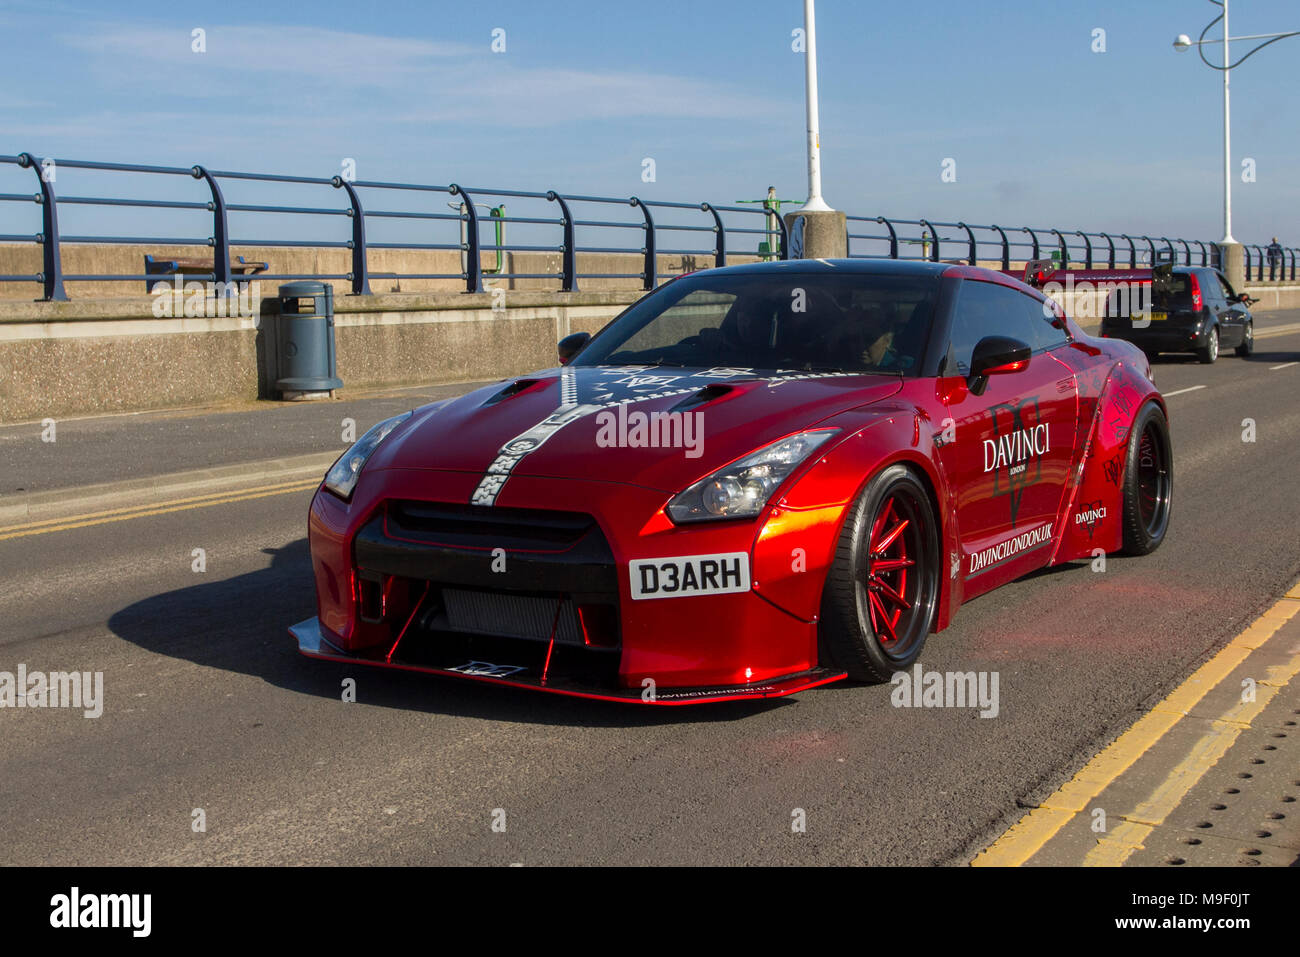 Red Nissan GT-R Davinci sports car at the North-West Supercar event as cars arrive in the coastal resort of Southport. SuperCars are bumper to bumper on the seafront esplanade as modern classics, sports cars & Canon Run car enthusiasts enjoy a motoring day out. Stock Photo